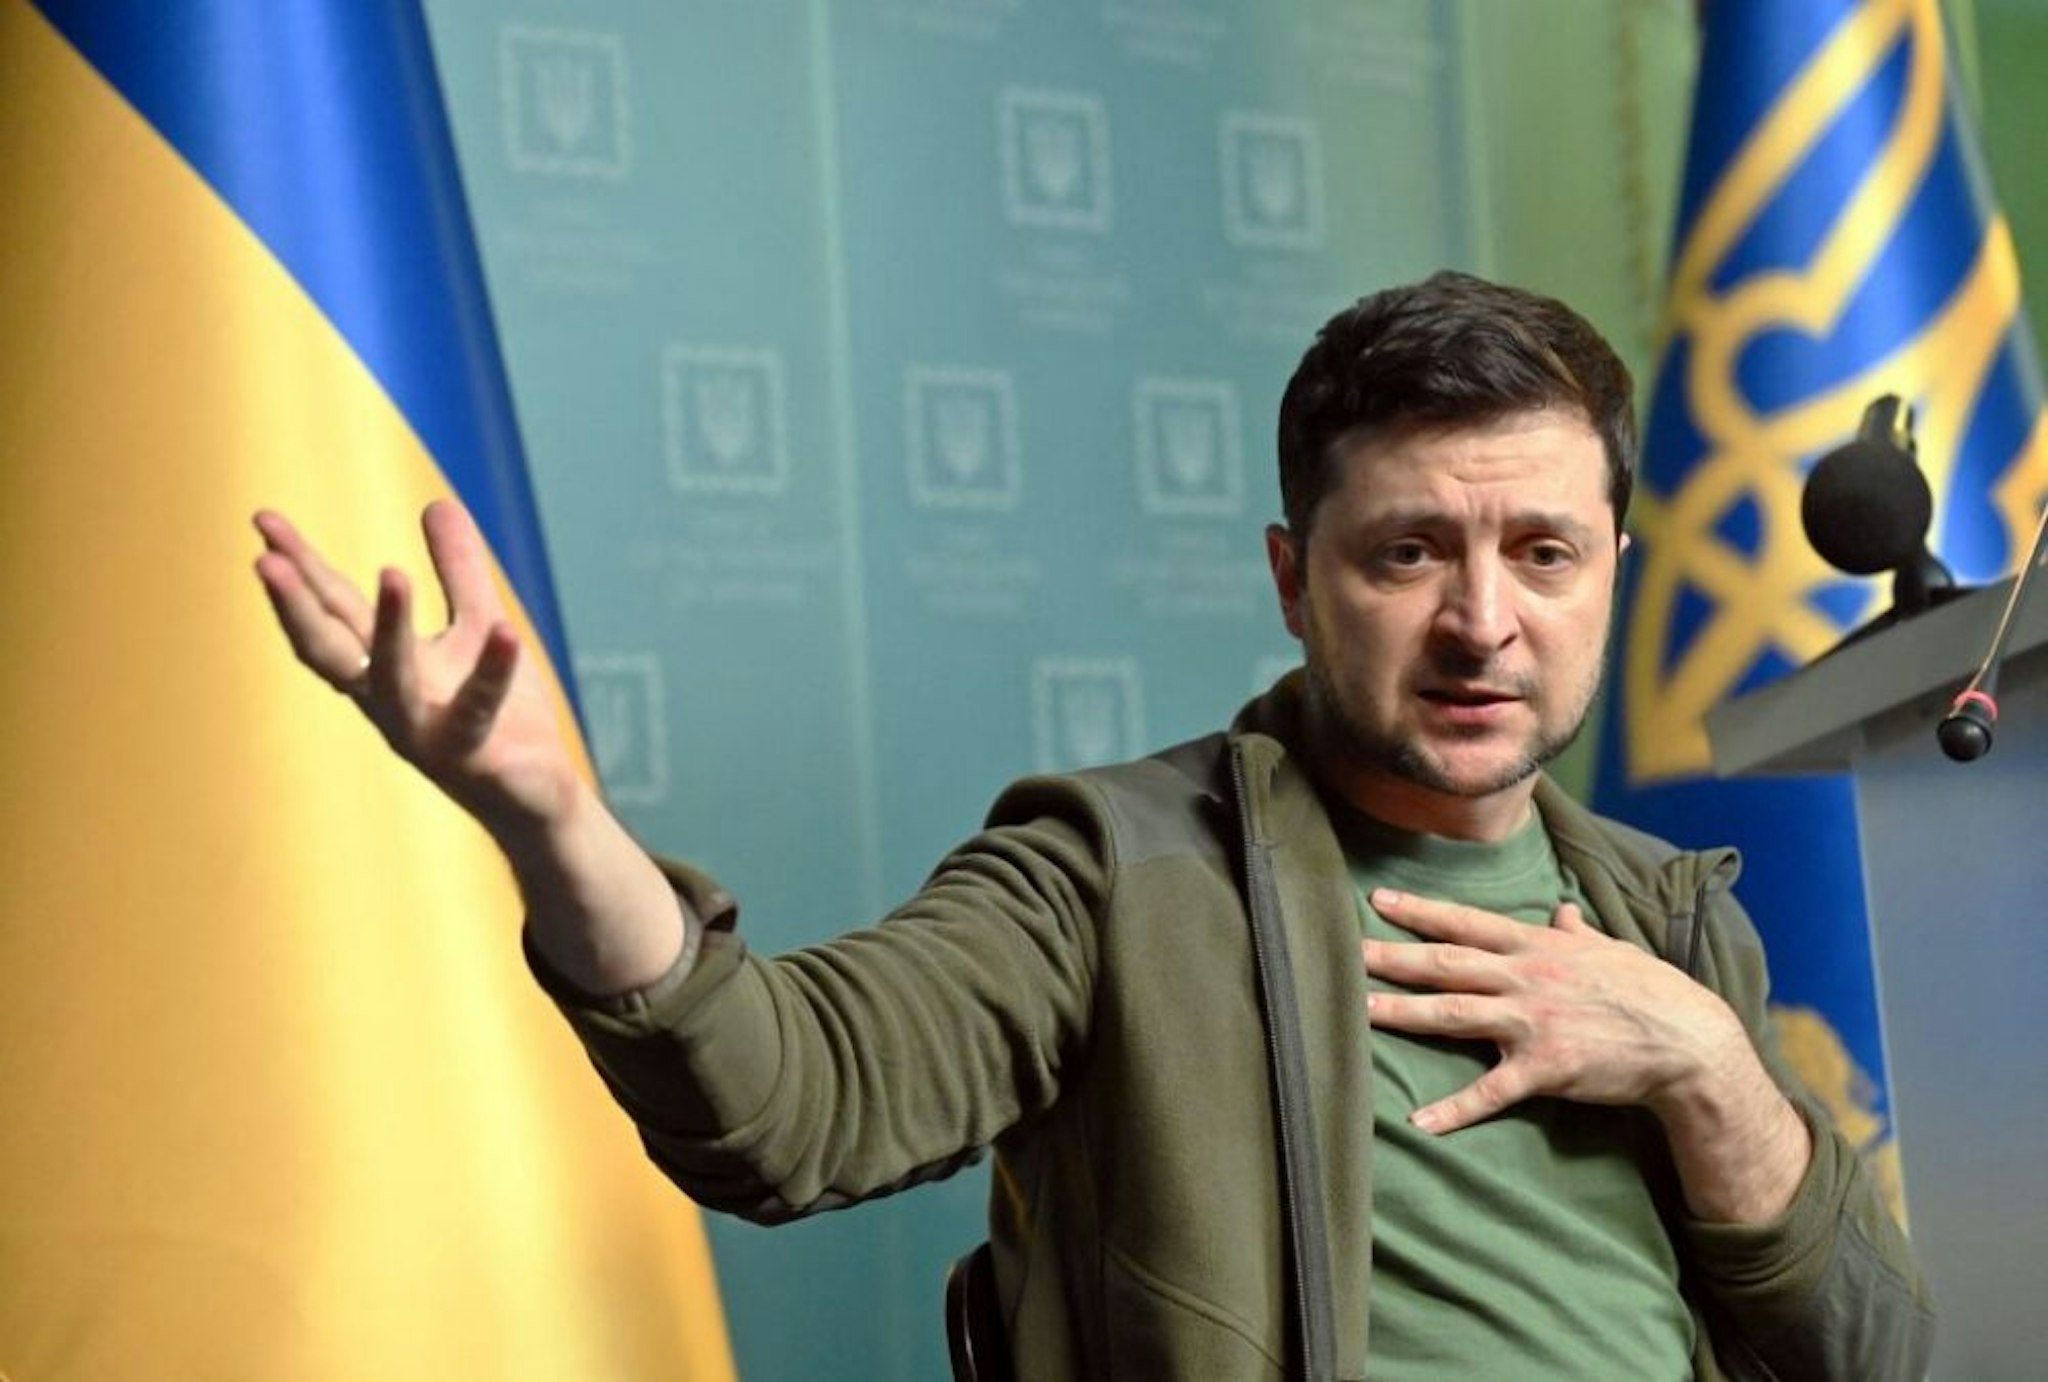 Ukrainian President Volodymyr Zelensky gestures as he speaks during a press conference in Kyiv on March 3, 2022. - Ukraine President Volodymyr Zelensky called on the West on March 3, 2022, to increase military aid to Ukraine, saying Russia would advance on the rest of Europe otherwise. "If you do not have the power to close the skies, then give me planes!" Zelensky said at a press conference. "If we are no more then, God forbid, Latvia, Lithuania, Estonia will be next," he said, adding: "Believe me."